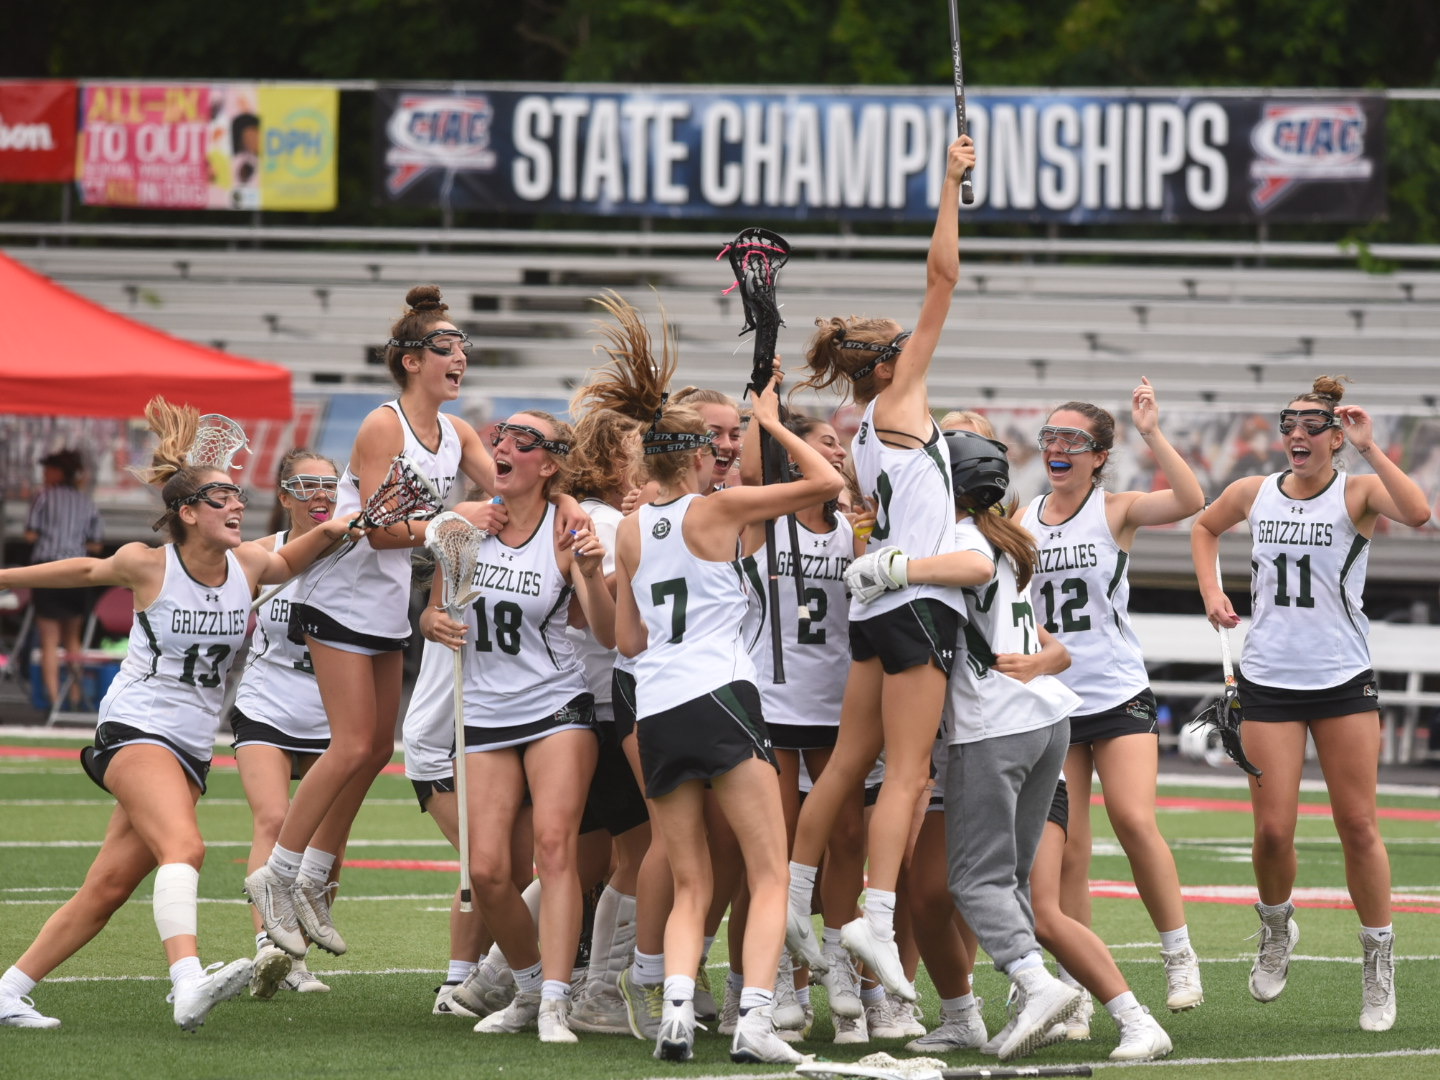 2023 Connecticut high school girls lacrosse storylines, games to watch